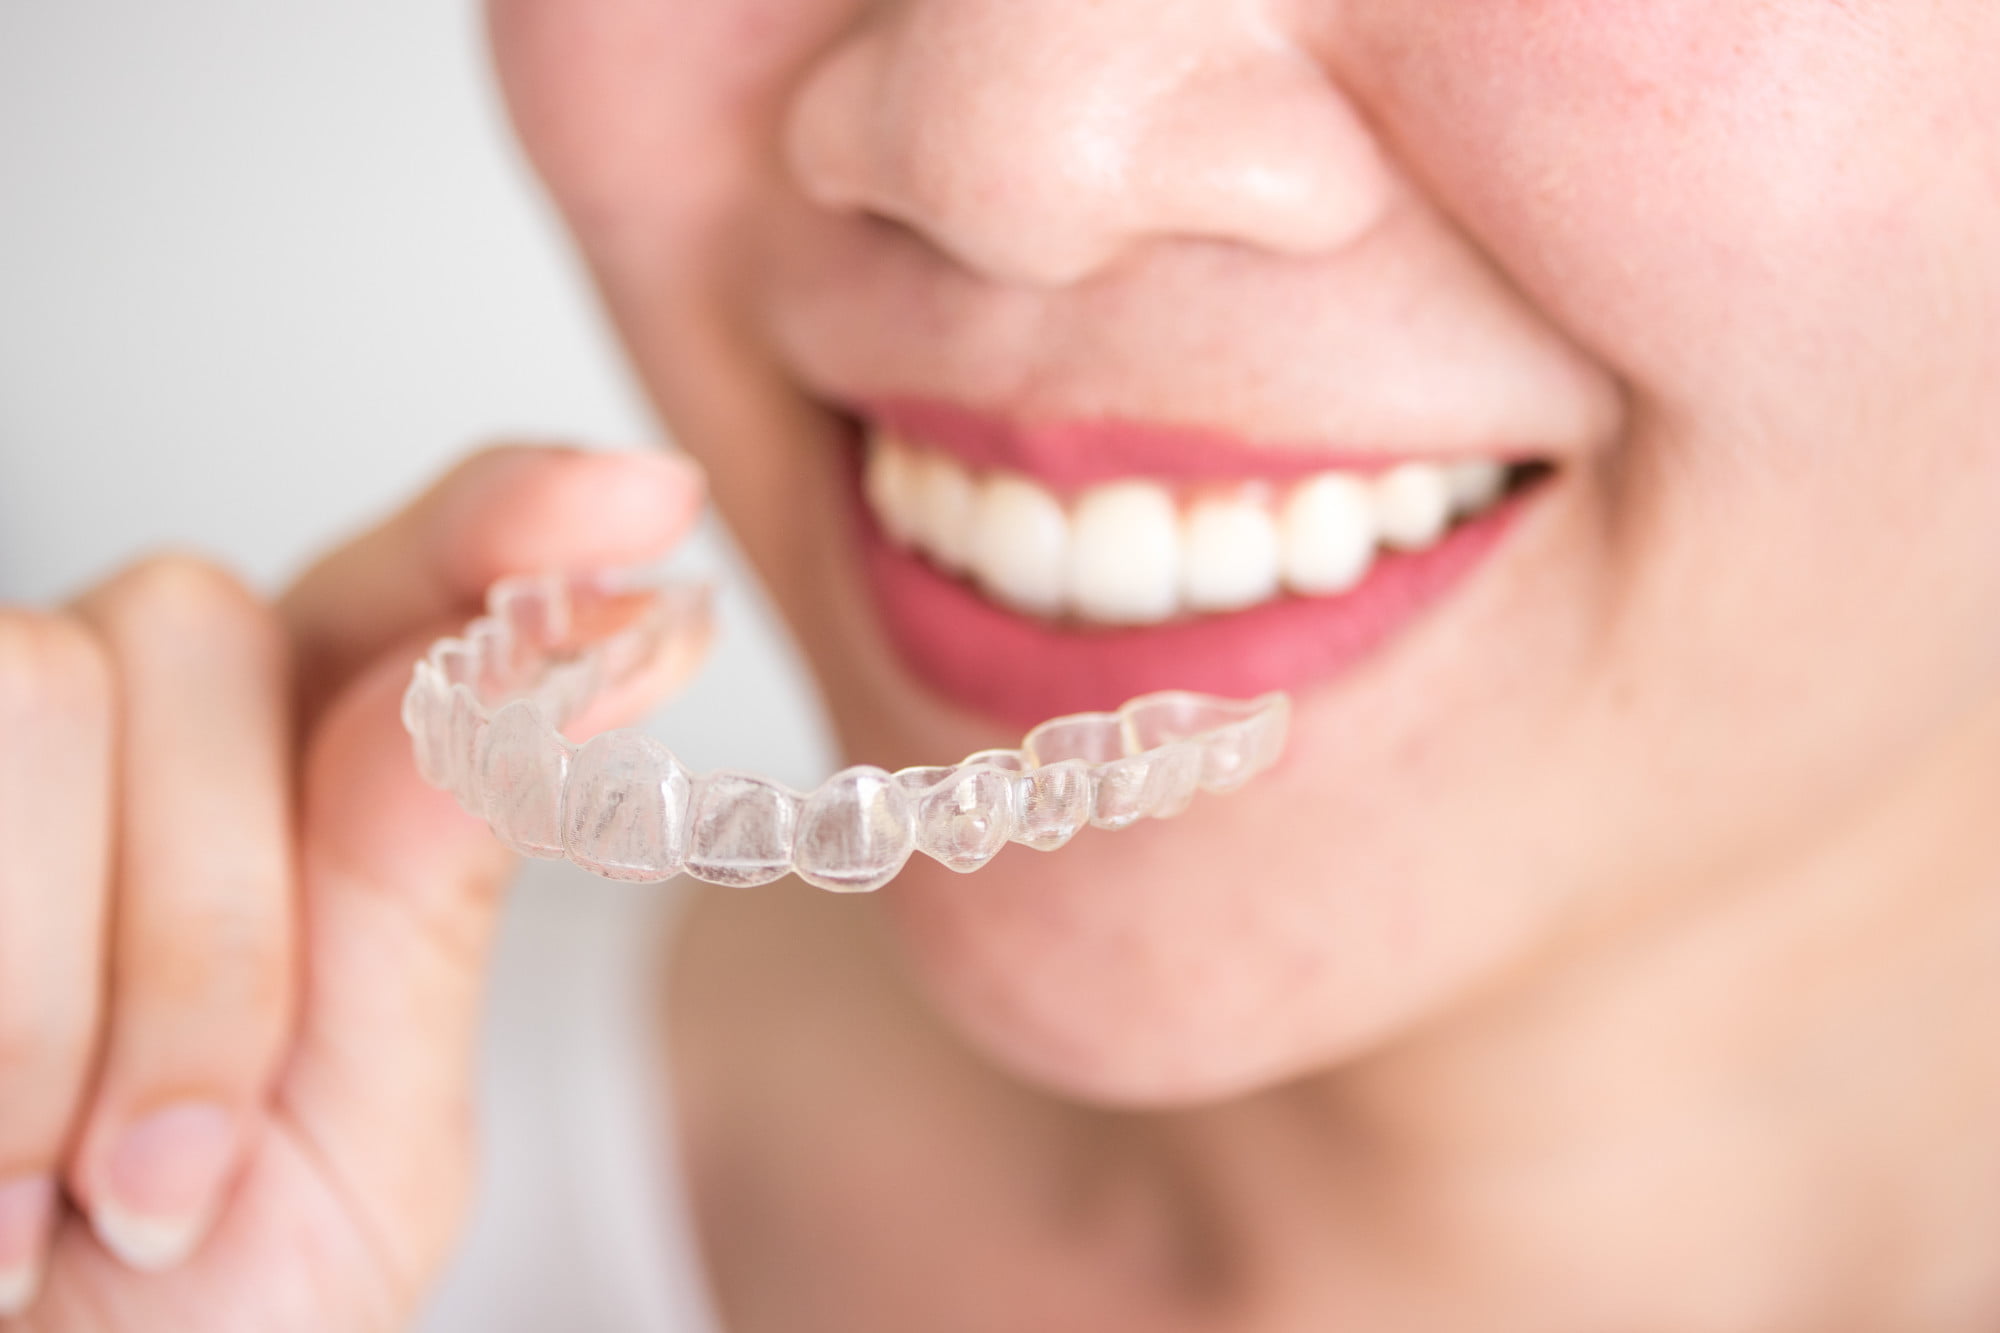 There are a ton of benefits that come with Invisalign treatment. Here's a quick look at five benefits of Invisalign that you should know about.